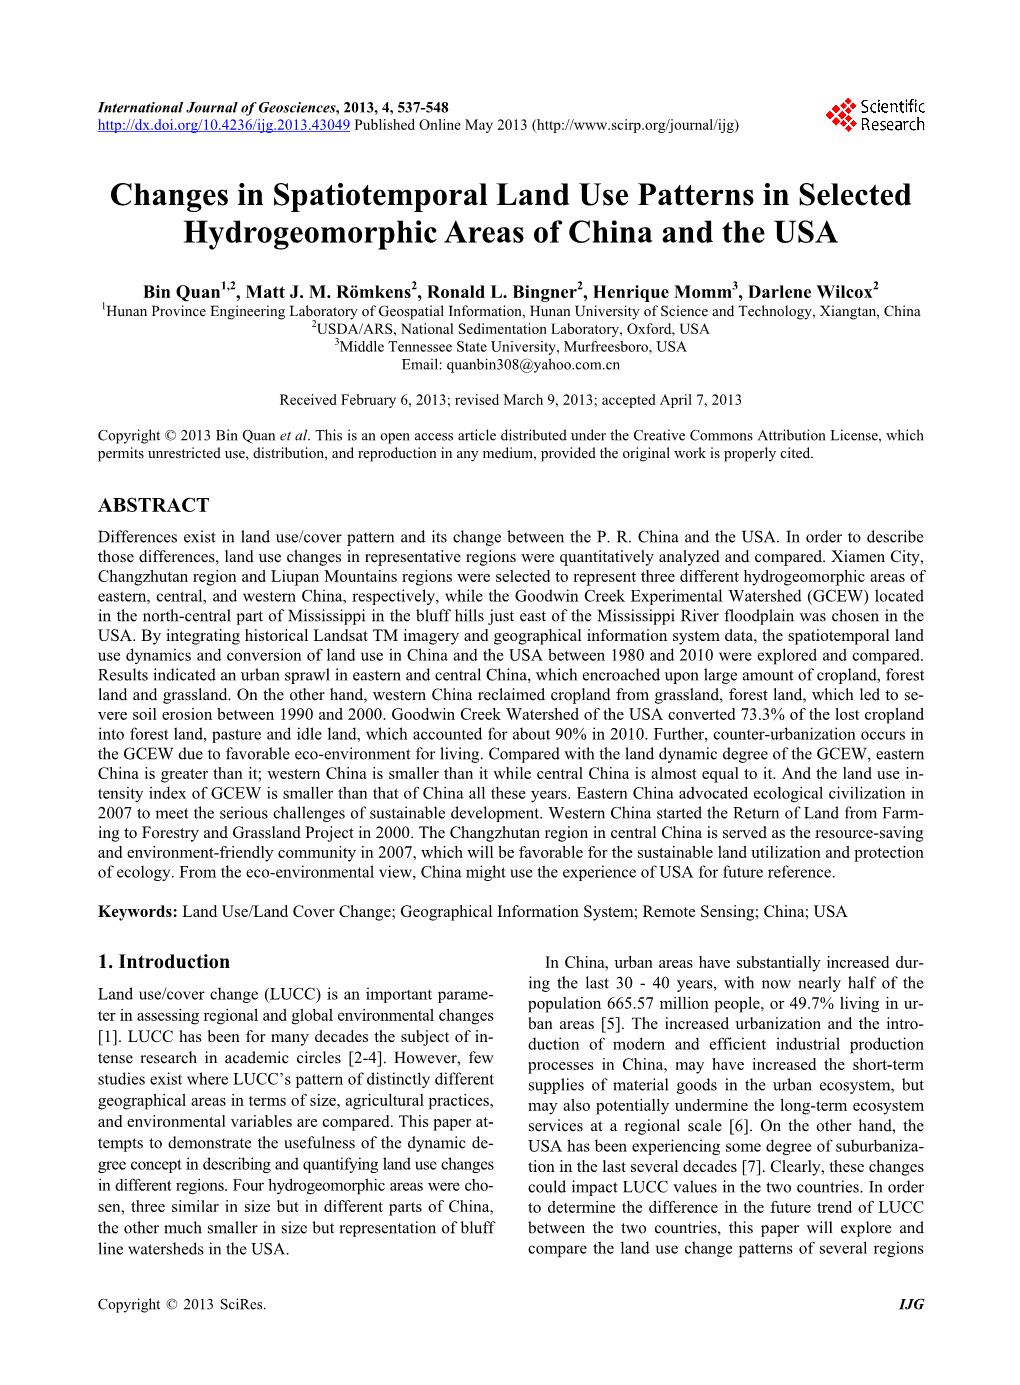 Changes in Spatiotemporal Land Use Patterns in Selected Hydrogeomorphic Areas of China and the USA